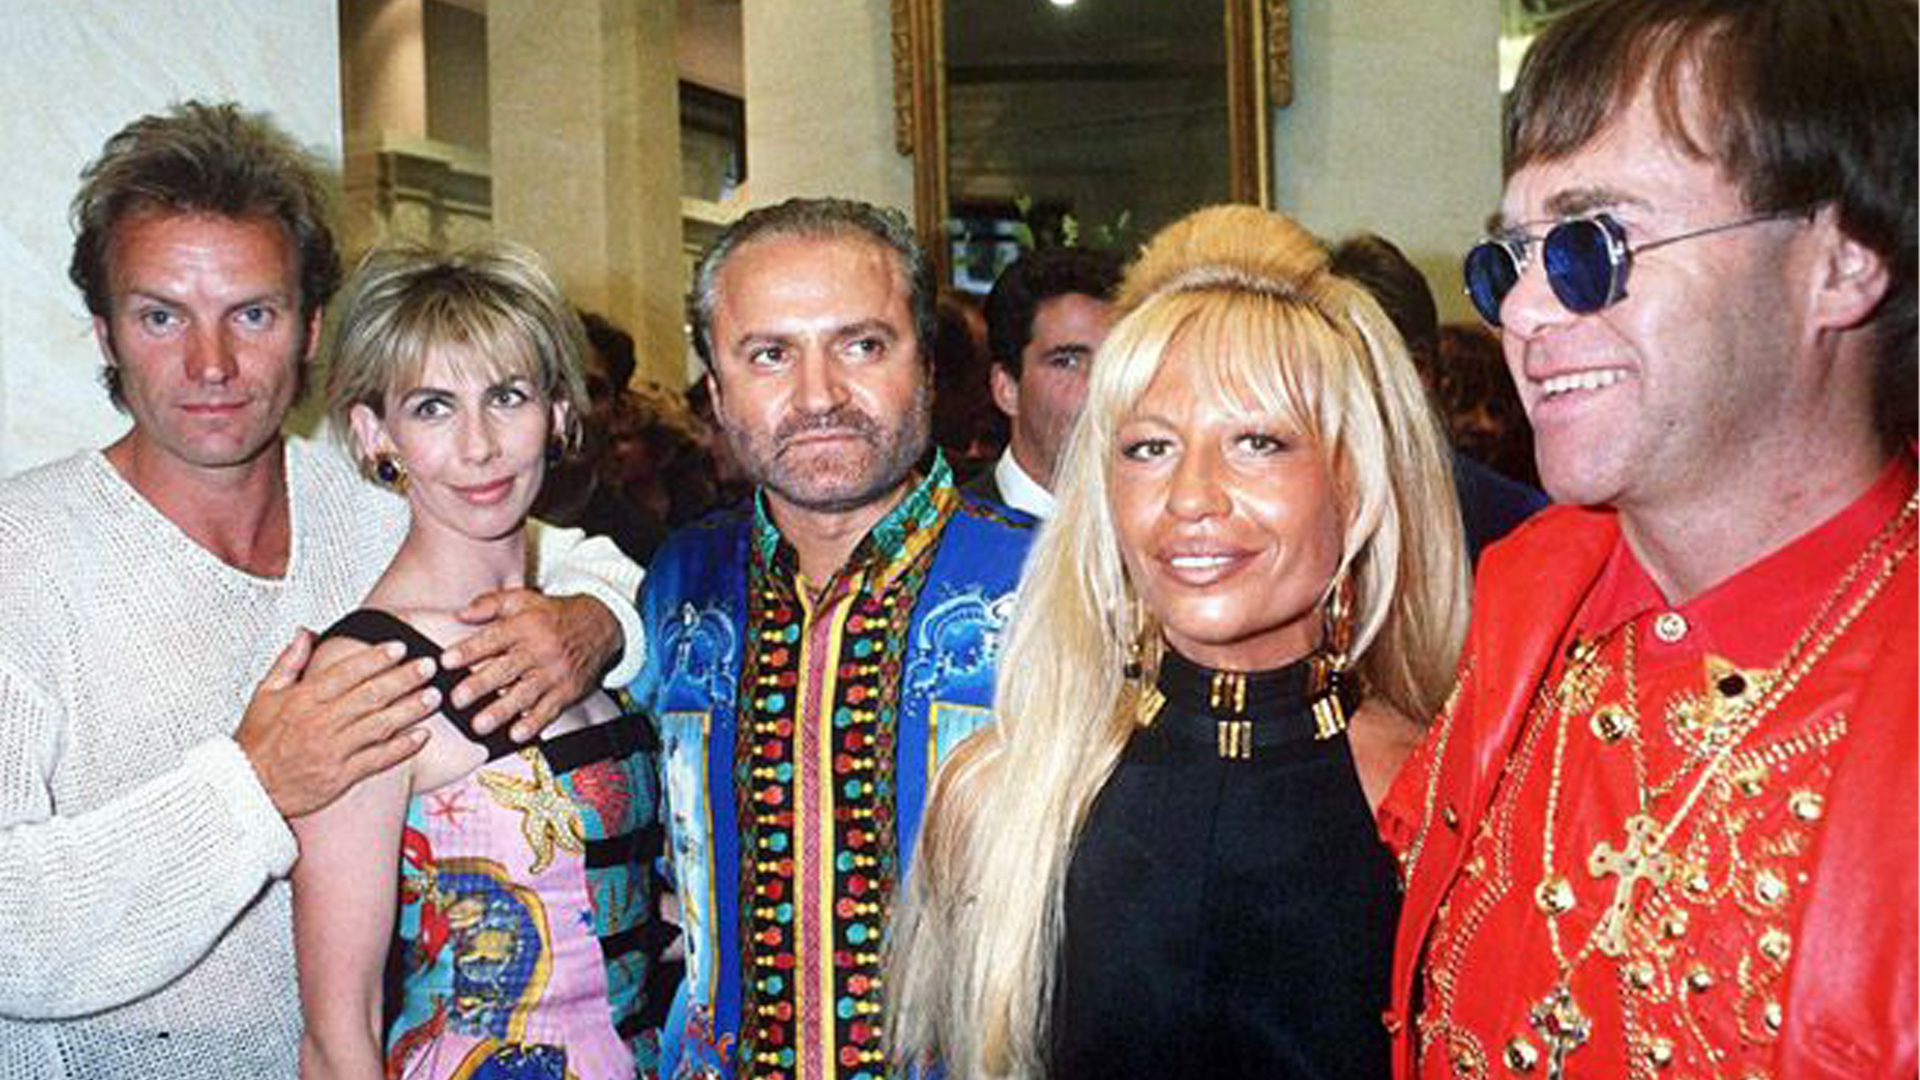 Gianni Versace Remembered by Donatella on 25th Anniversary of His Death